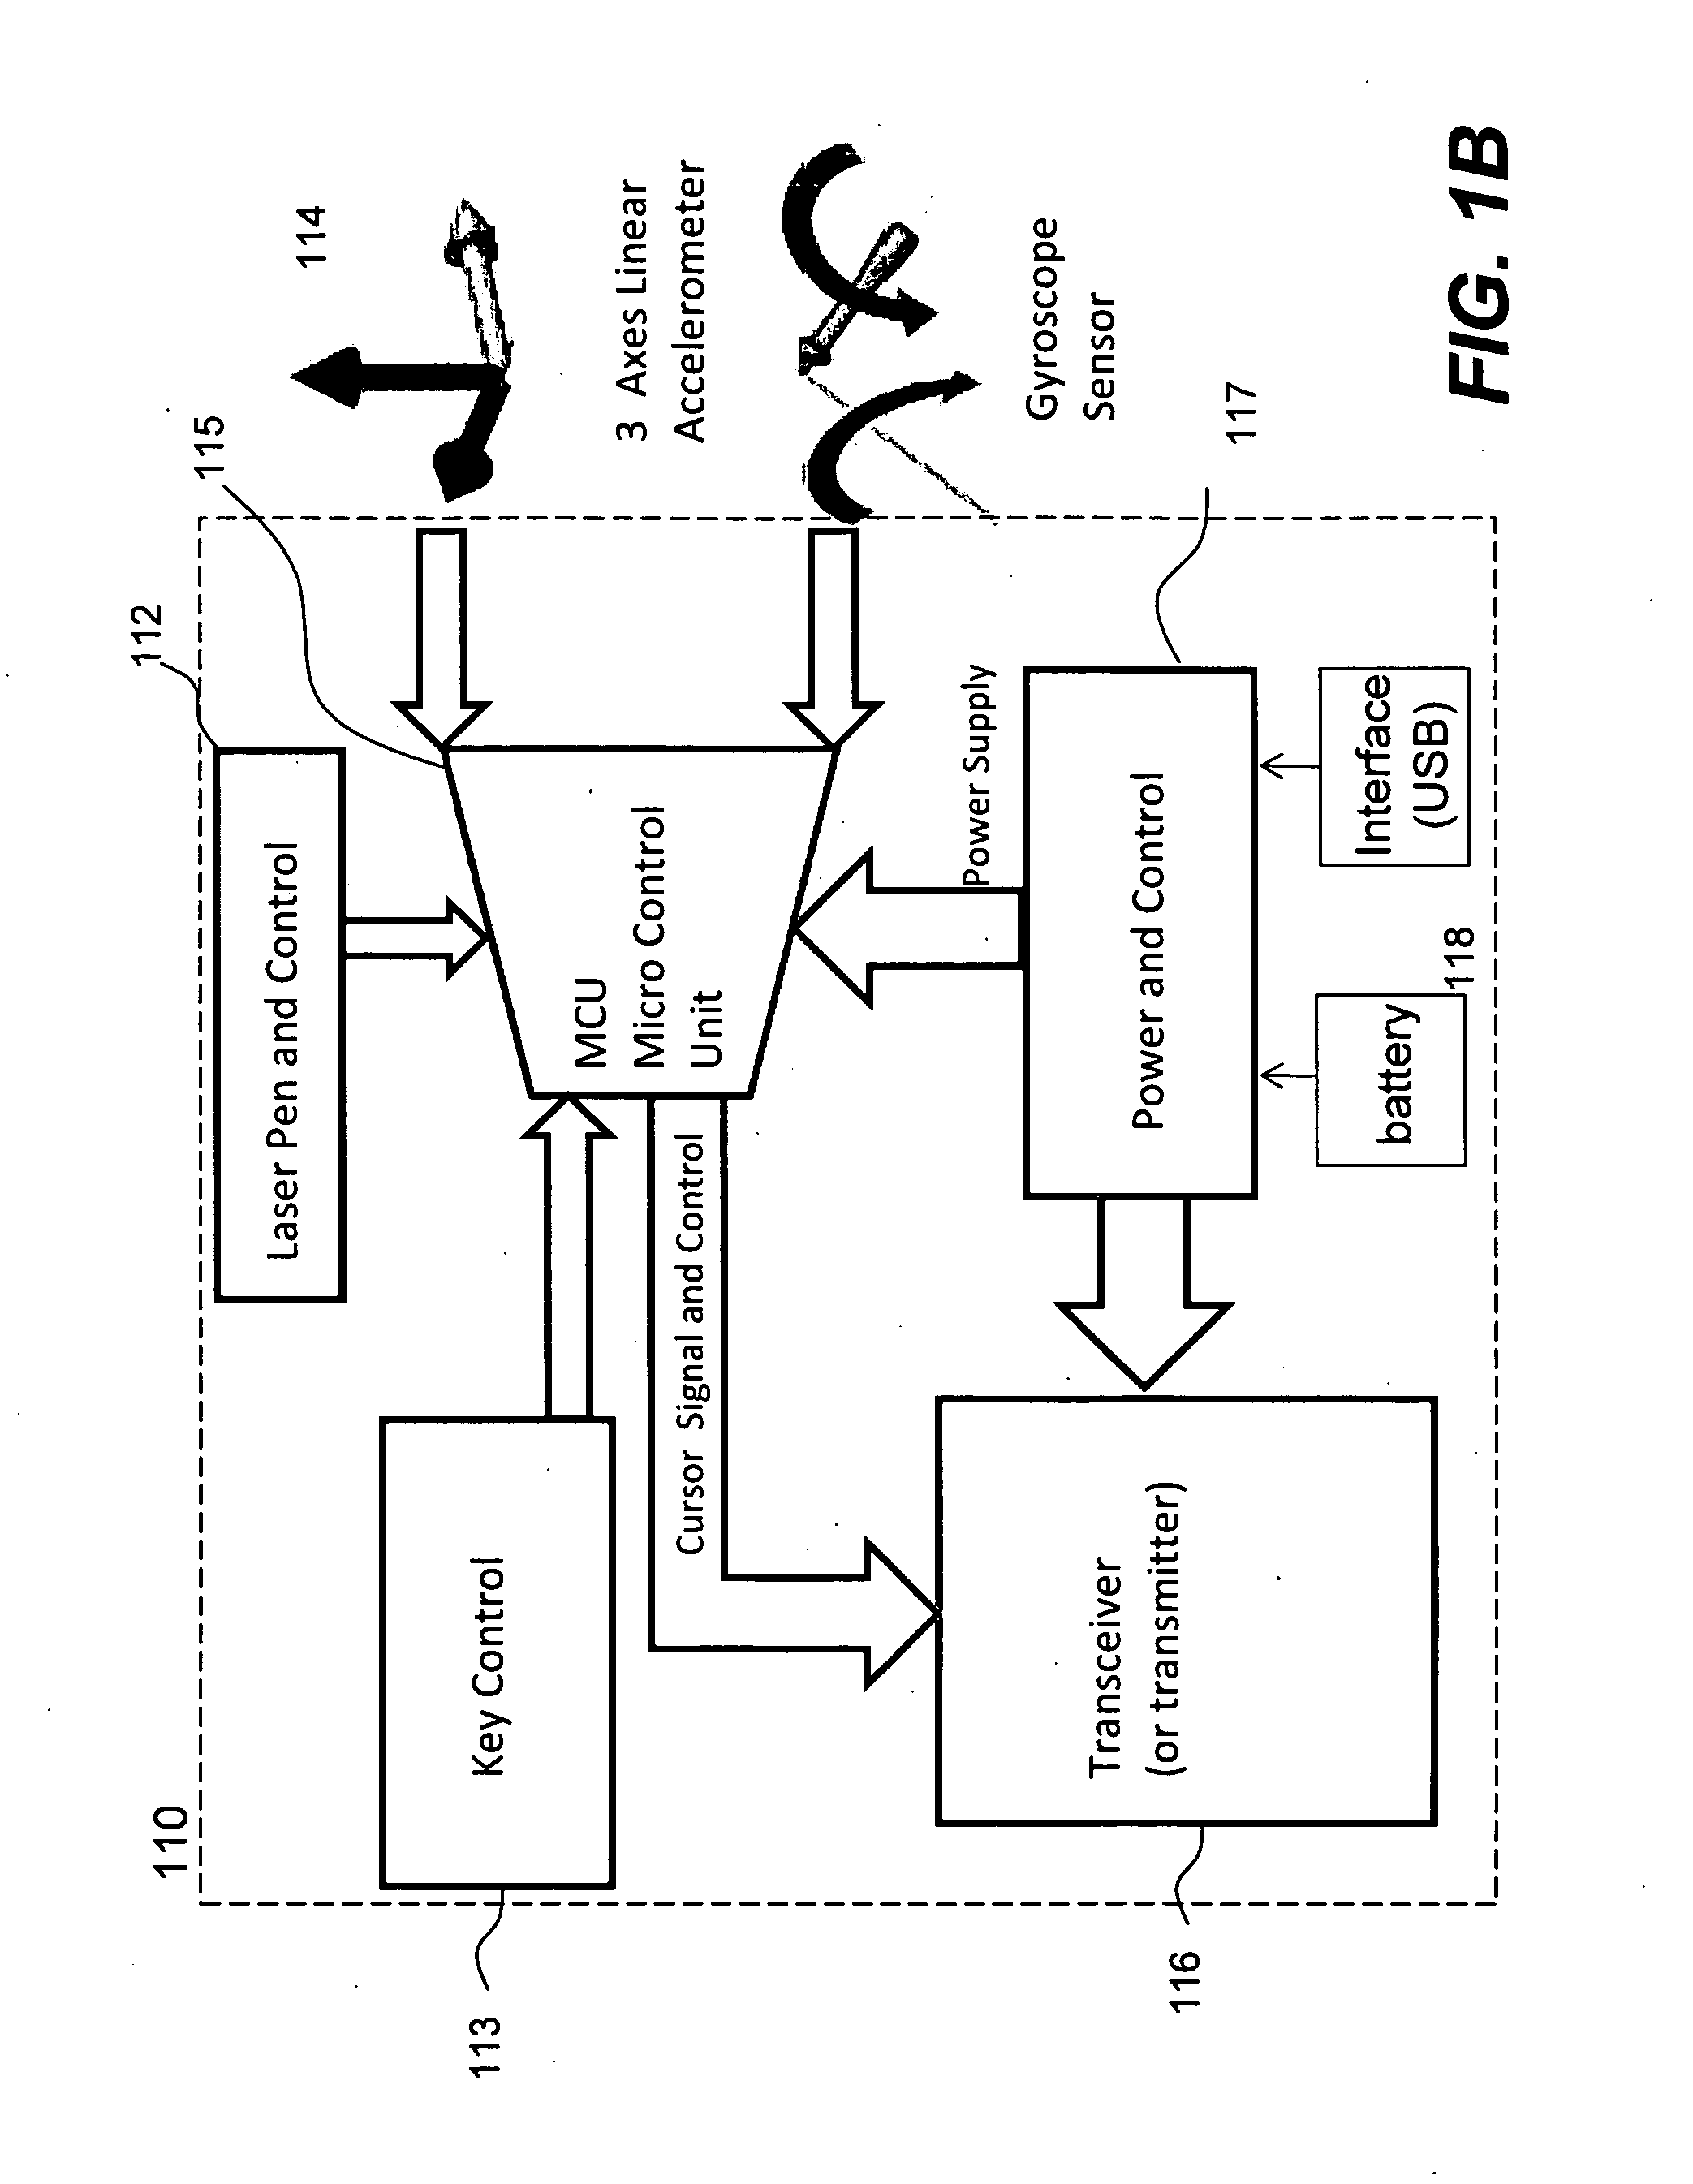 Remote controls for electronic display board